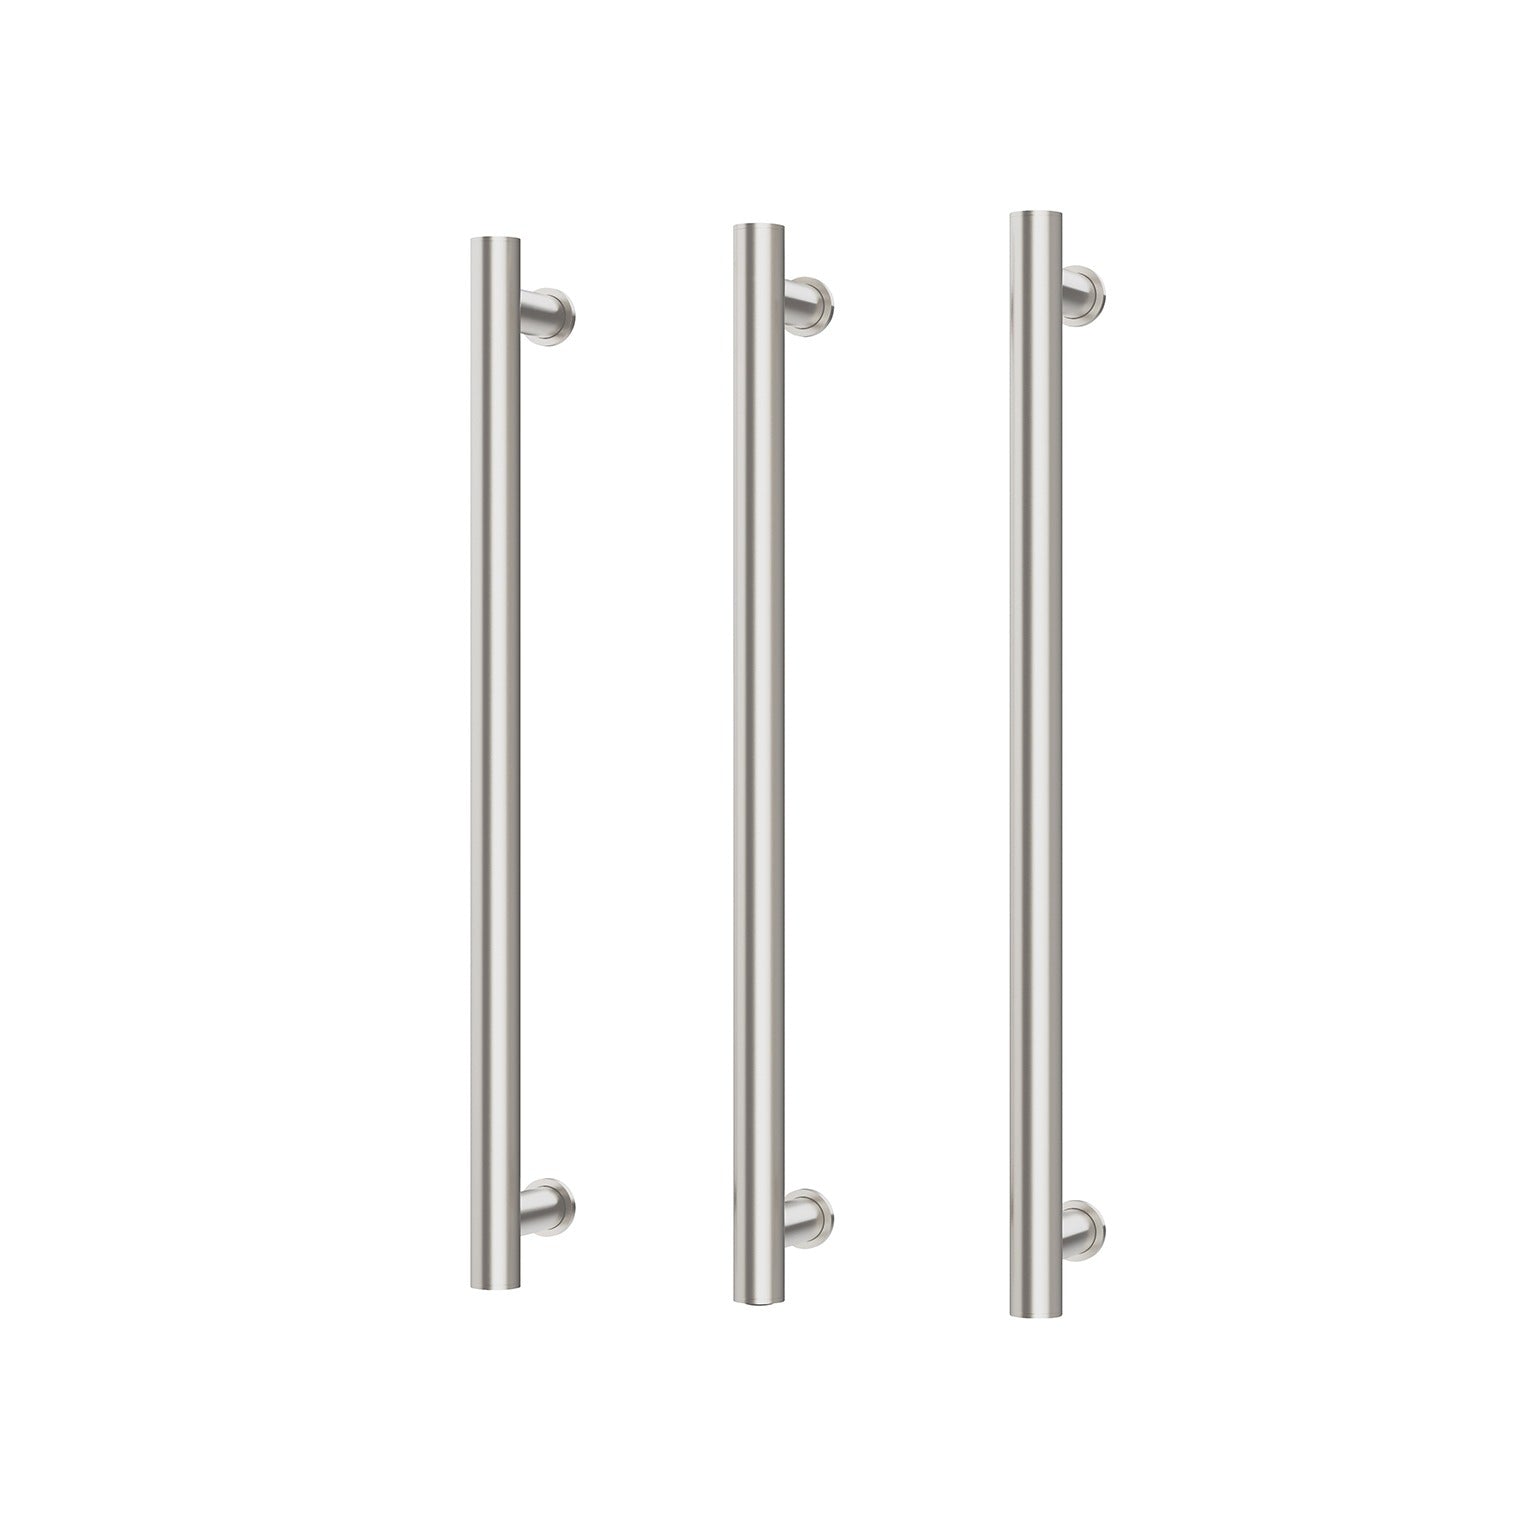 PHOENIX ROUND TRIPLE HEATED TOWEL RAIL BRUSHED NICKEL (AVAILABLE IN 600MM AND 800MM)